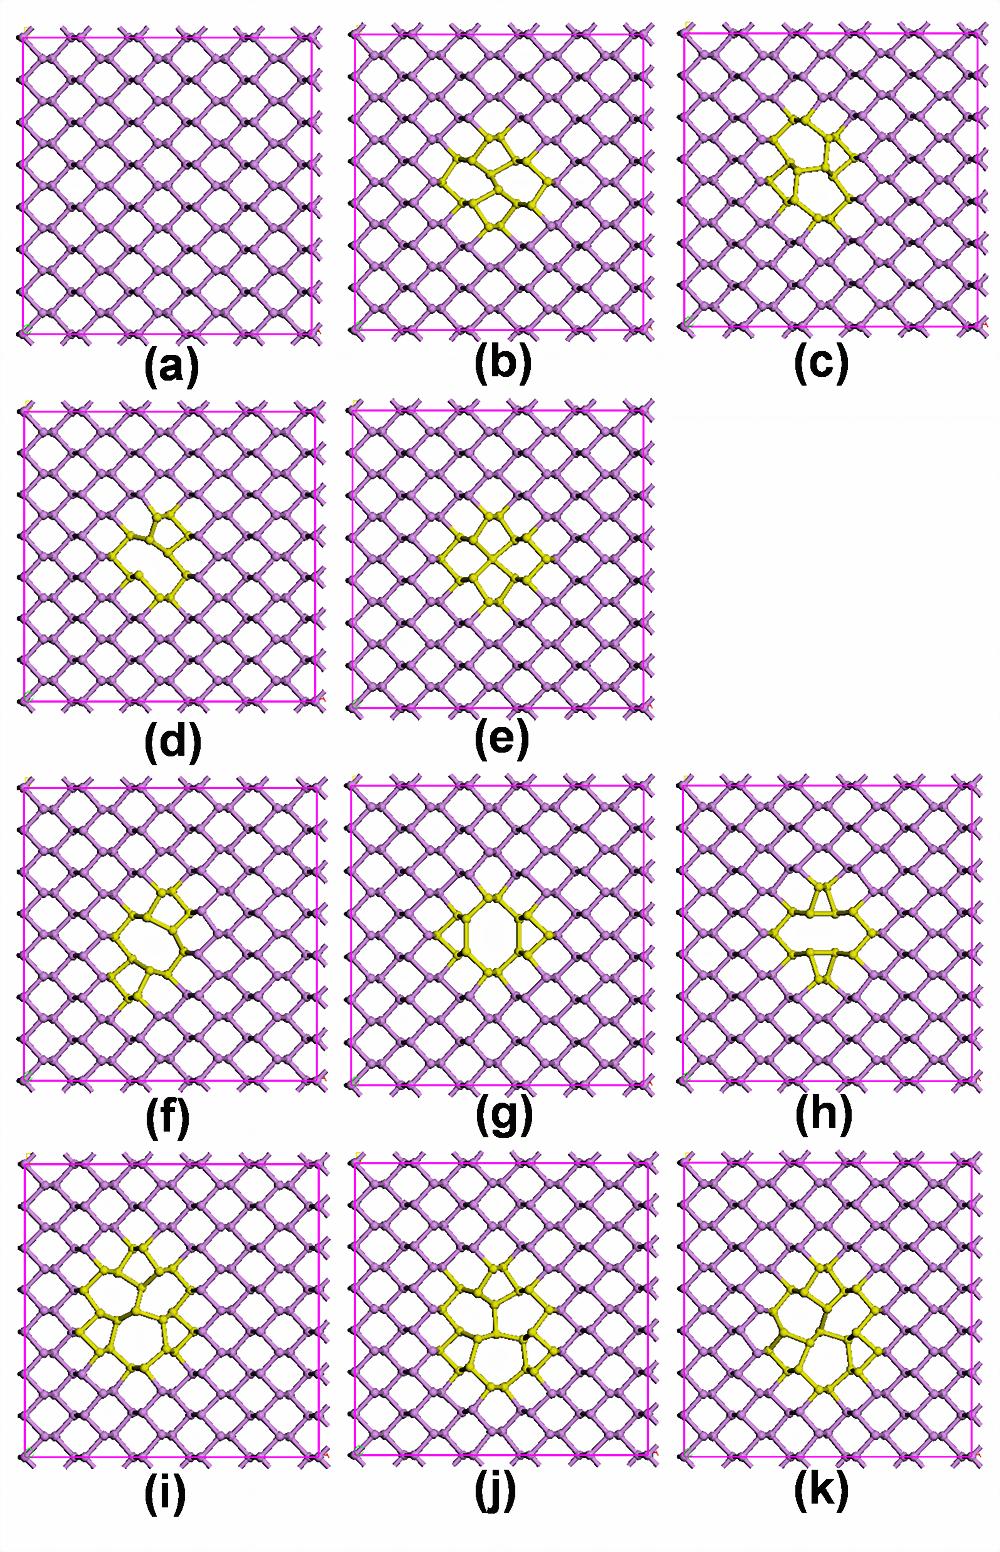 2 Perdew, Burke, and Ernzerhof (GGA-PBE)[23] is chosen due to its good description of electronic structures of phosphorene,[7] graphene[15] and silicene.